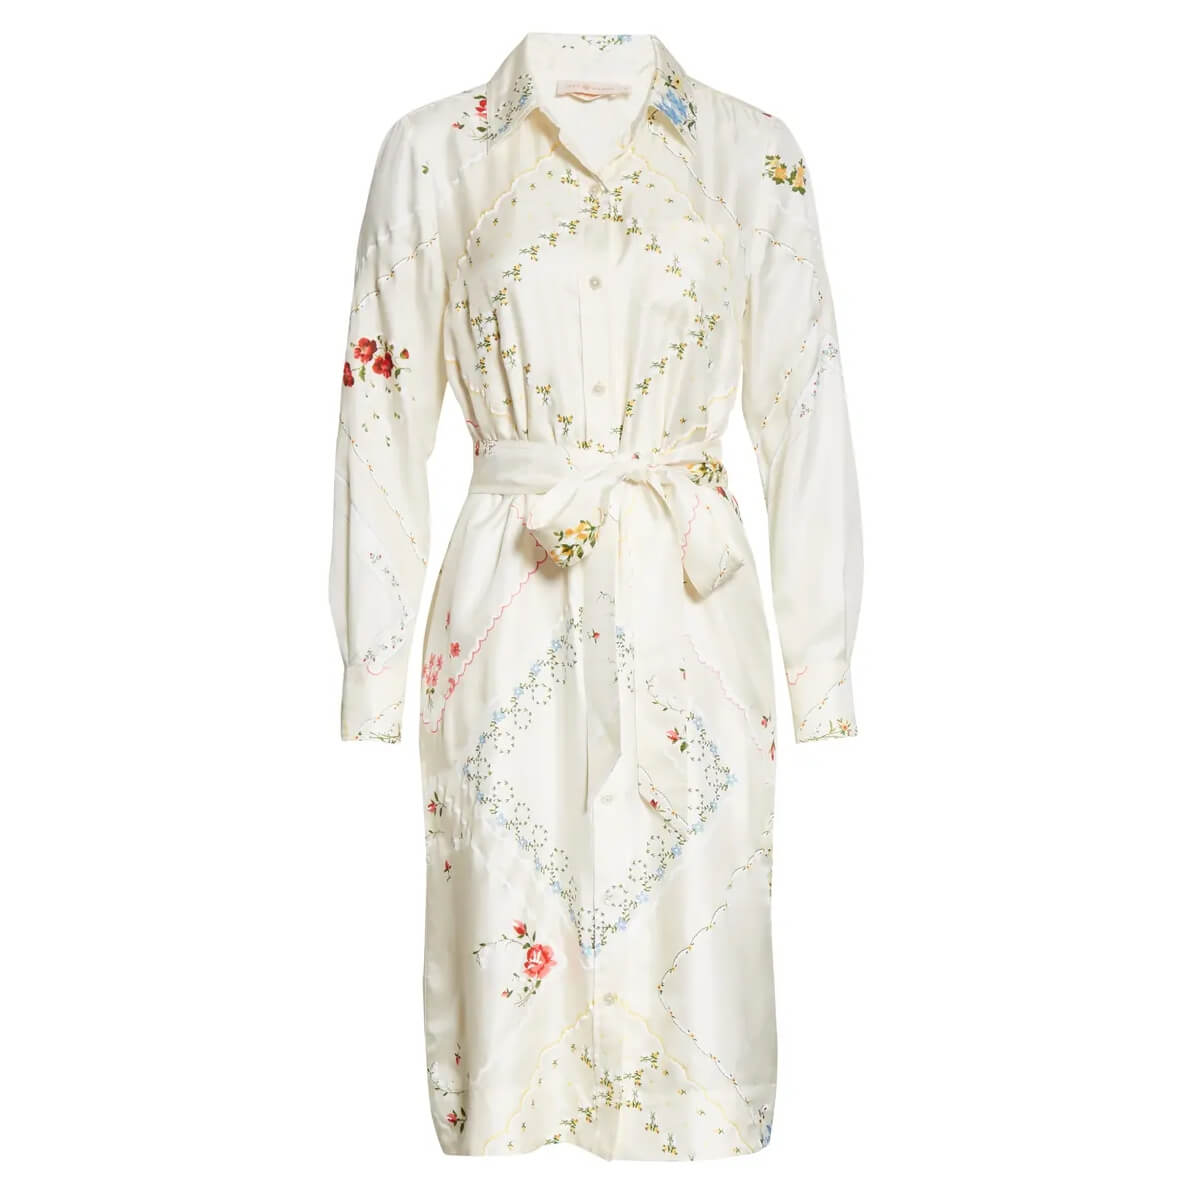 Tory Burch Kira Mixed Floral Convertible Ivory Afternoon Tea